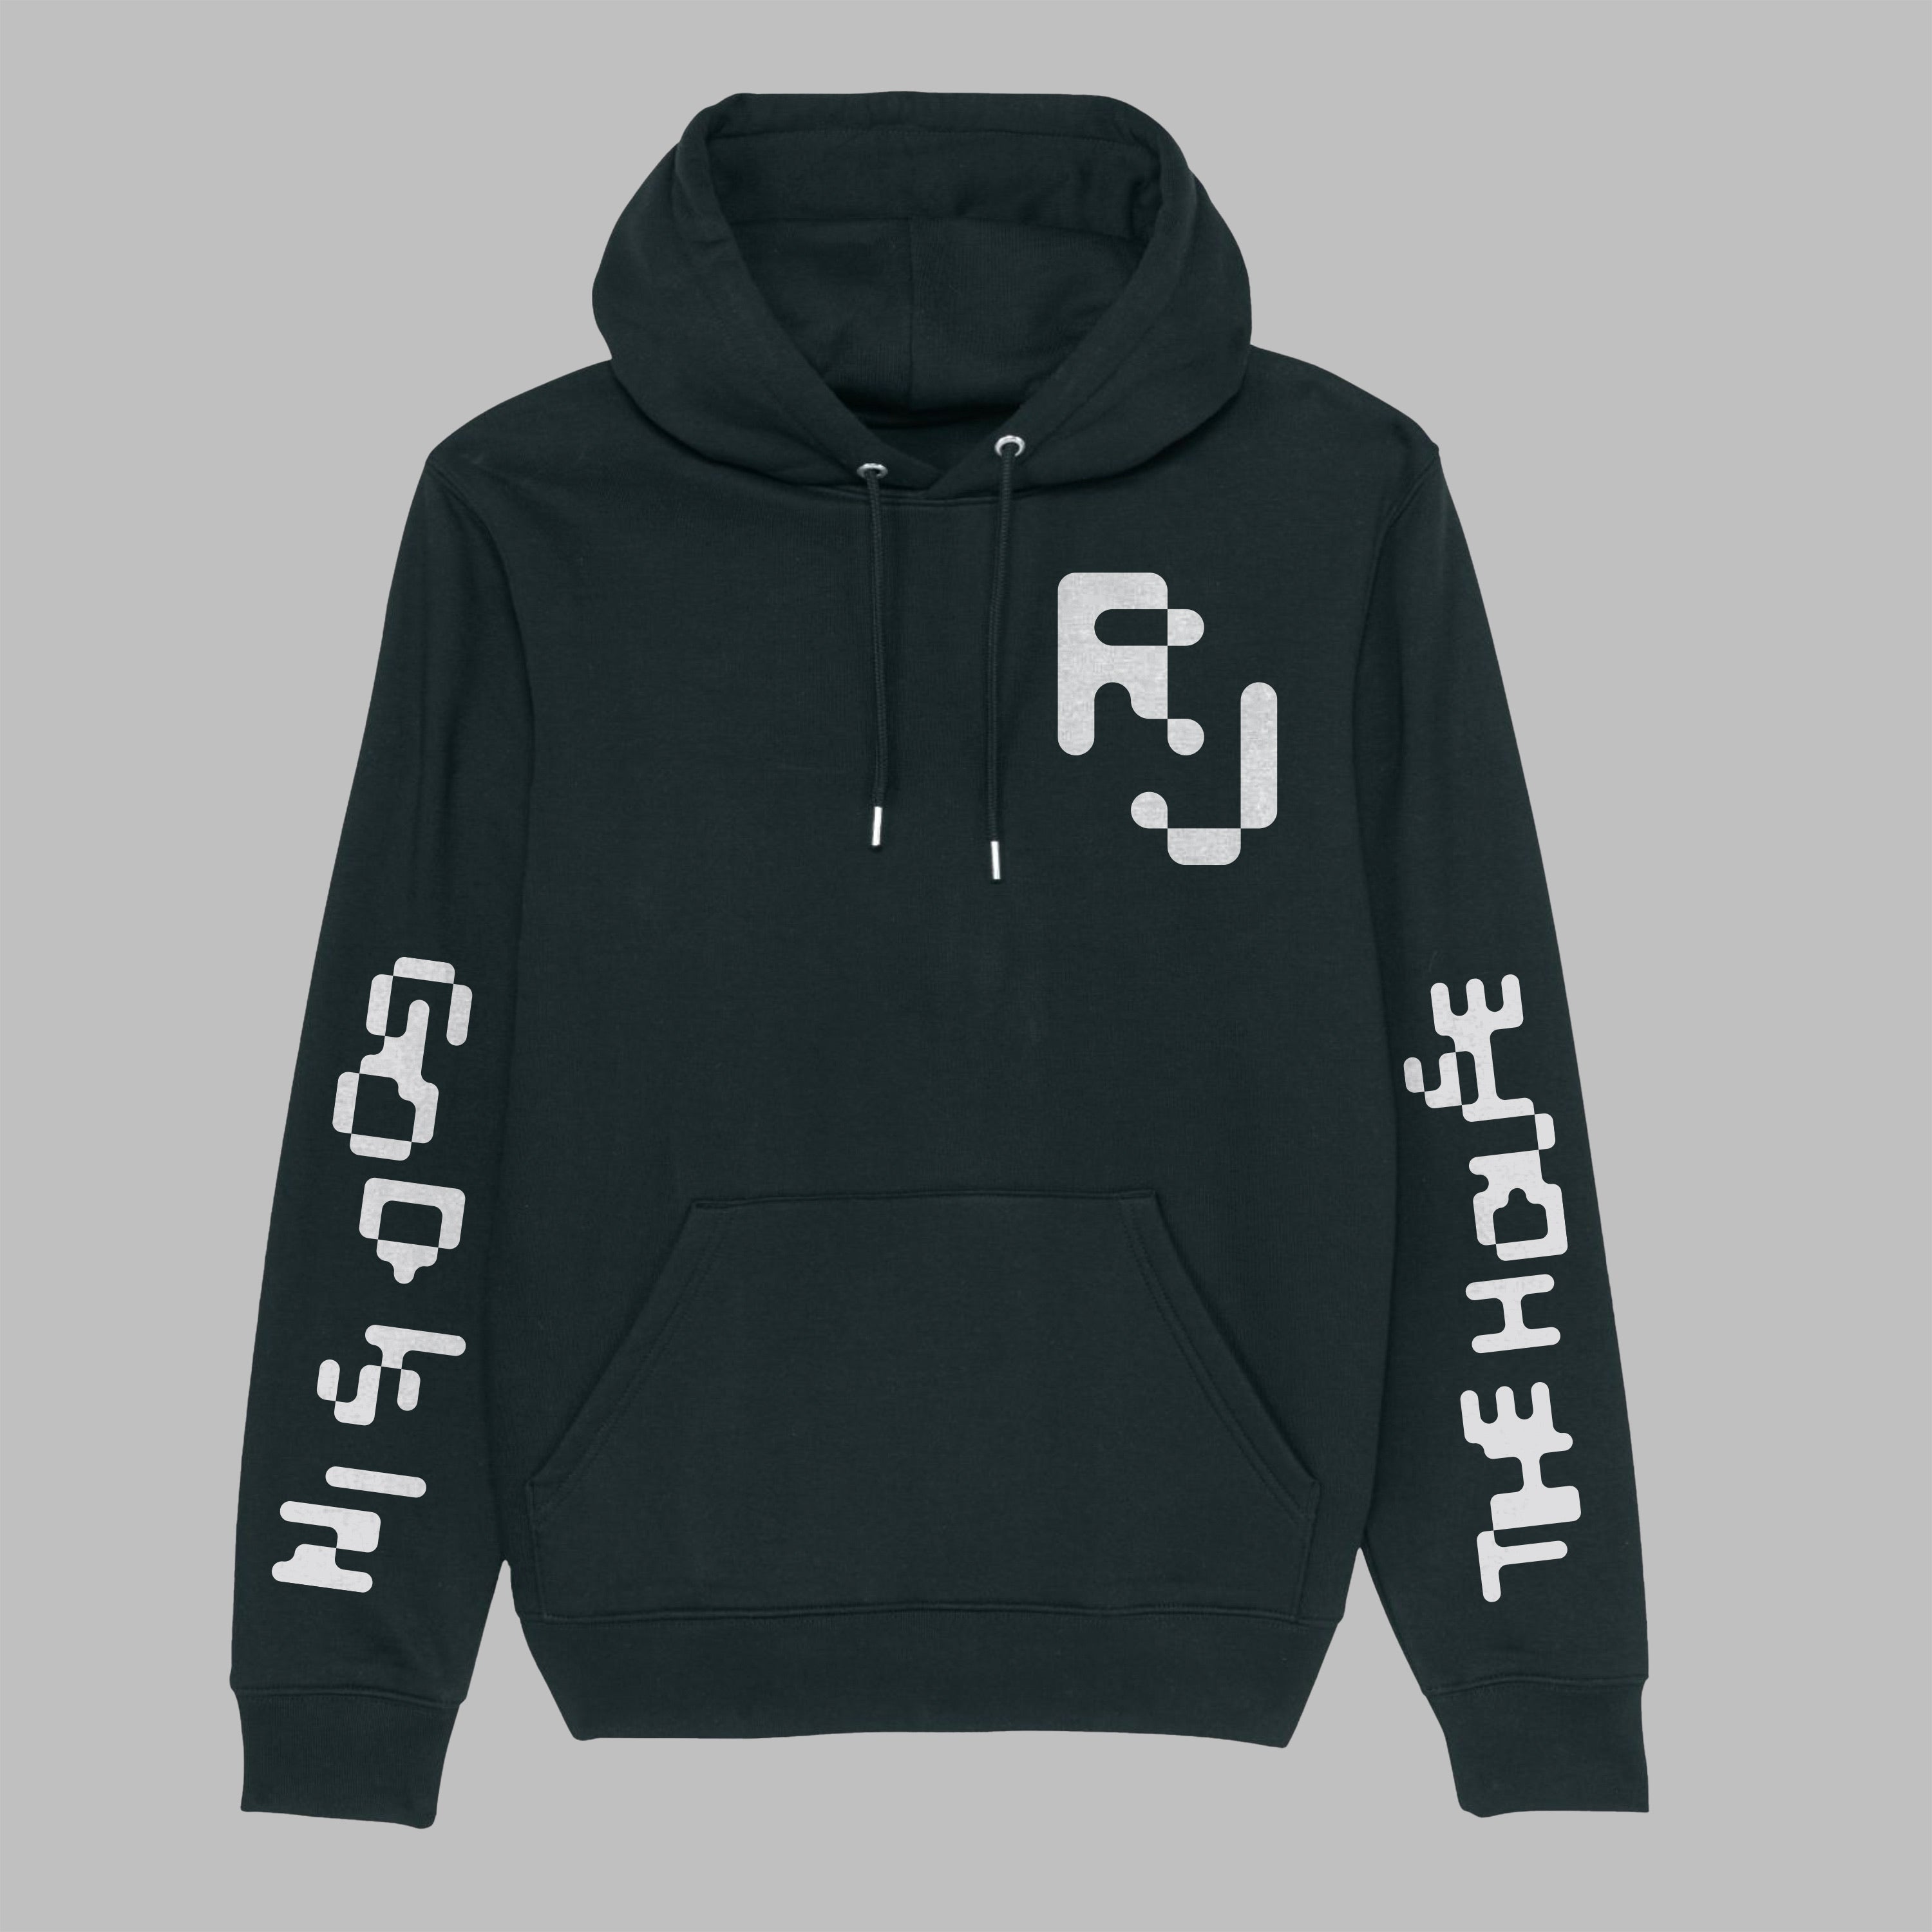 God is in the House -Remixed - Hoodie - Black